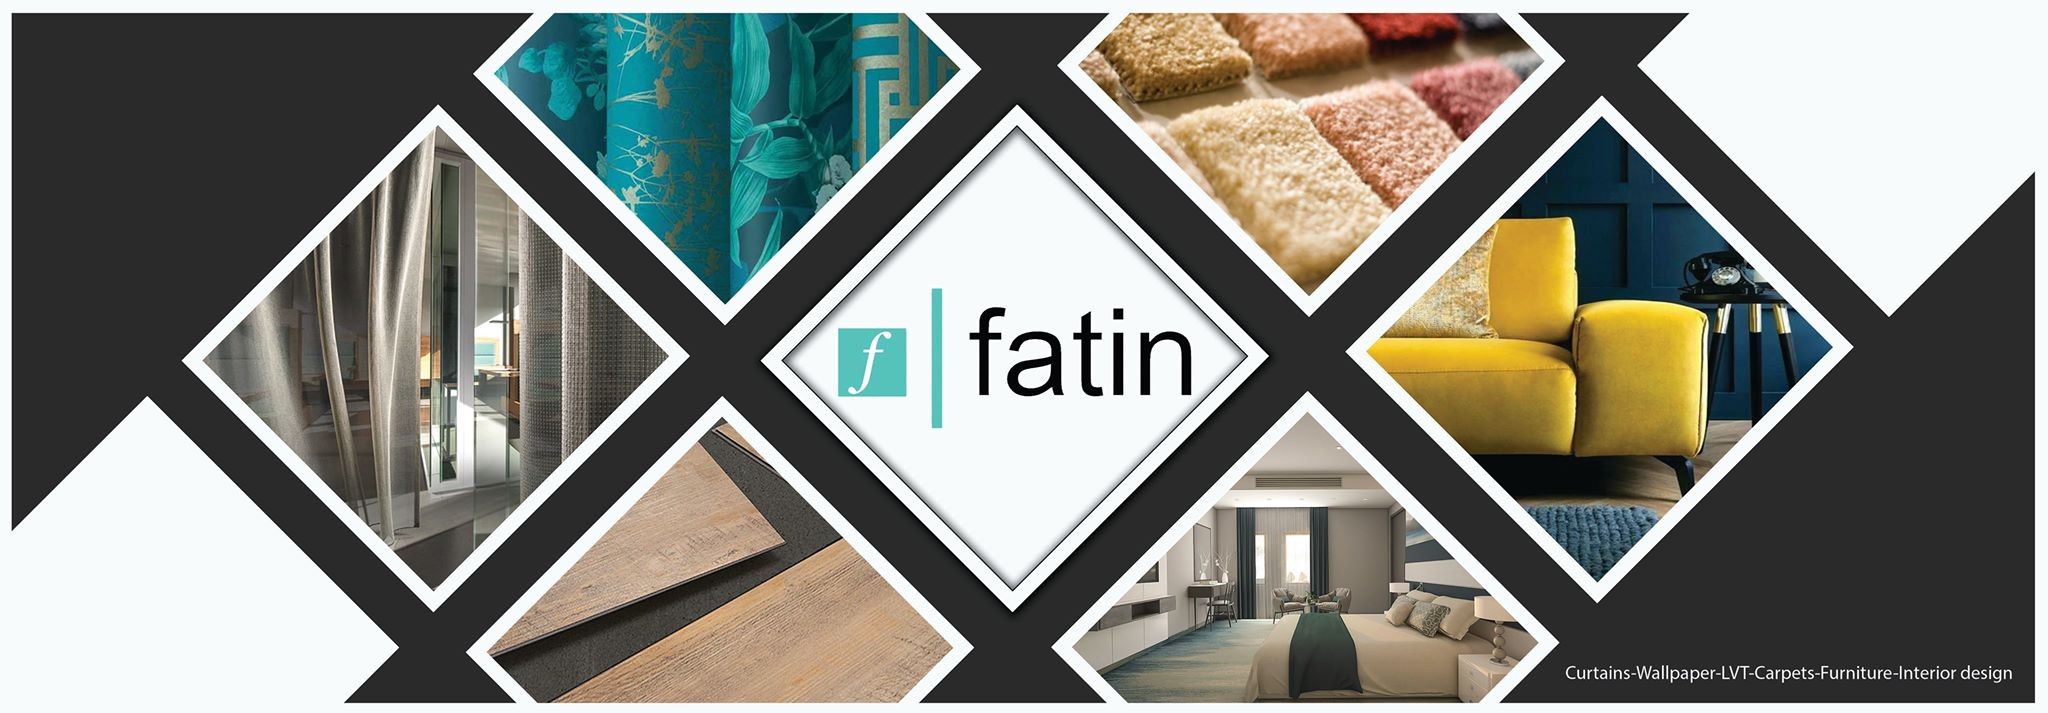 fatin furniture mission statement, employees and hiring